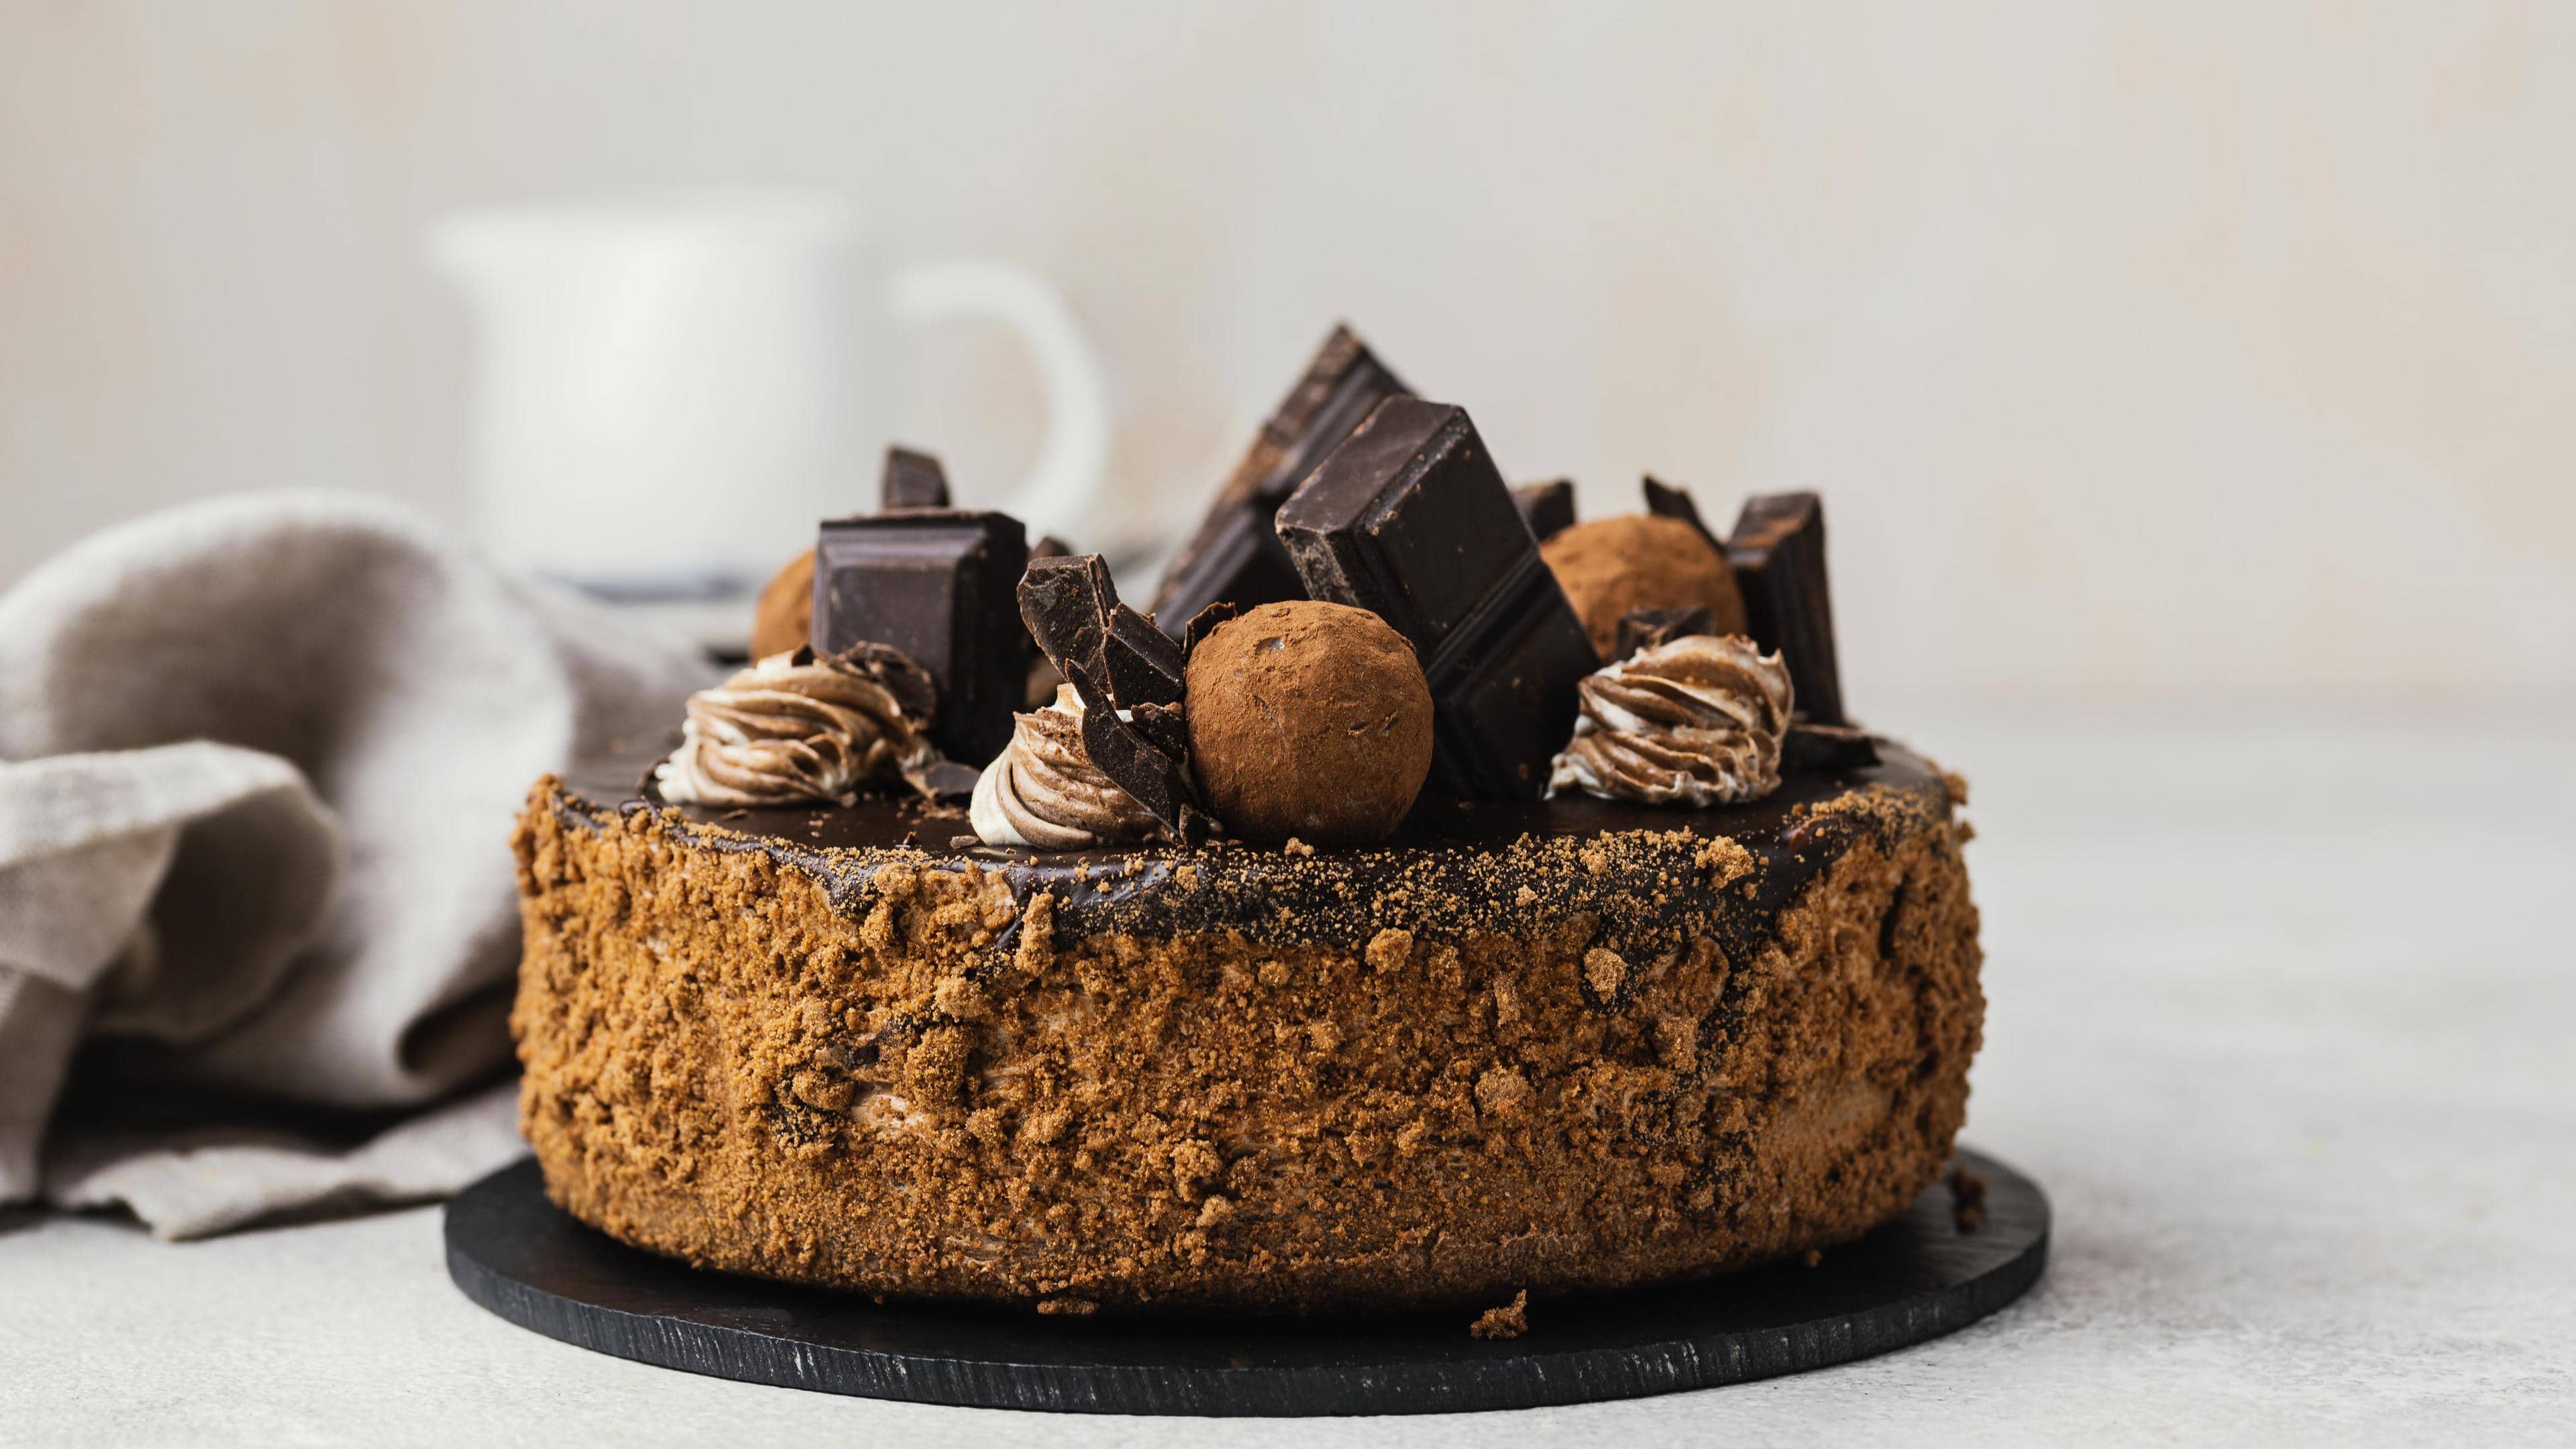 Sweet chocolate cake with chocolate truffles and chocolate cubes which are all part of the foods that make you shorter